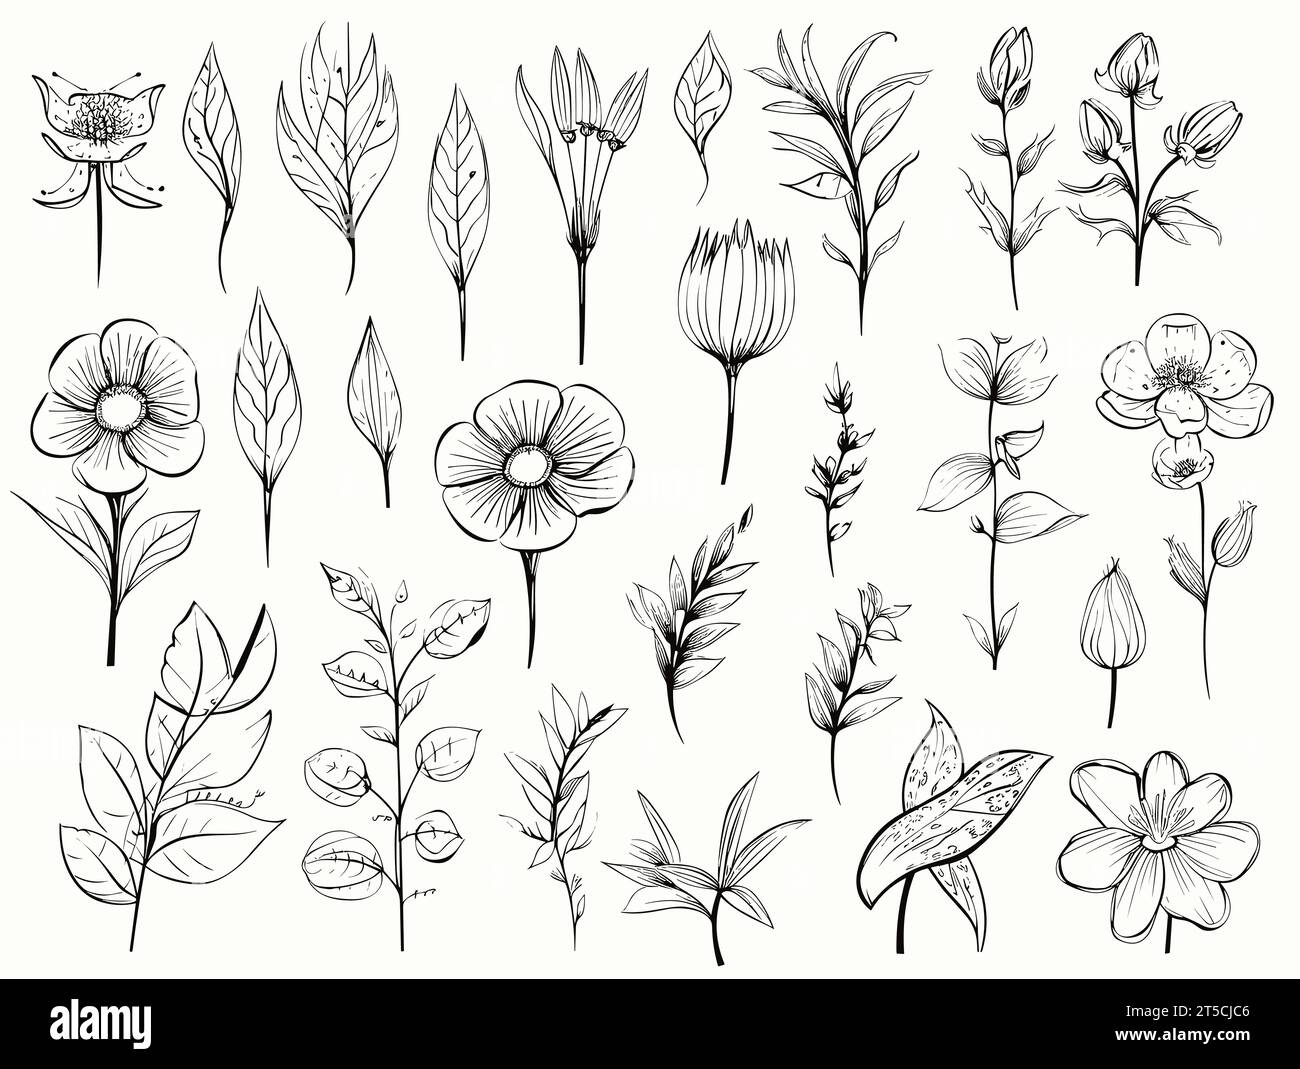 Drawing of Set of vector flower icons illustration separated, sweeping overdrawn lines. Stock Vector